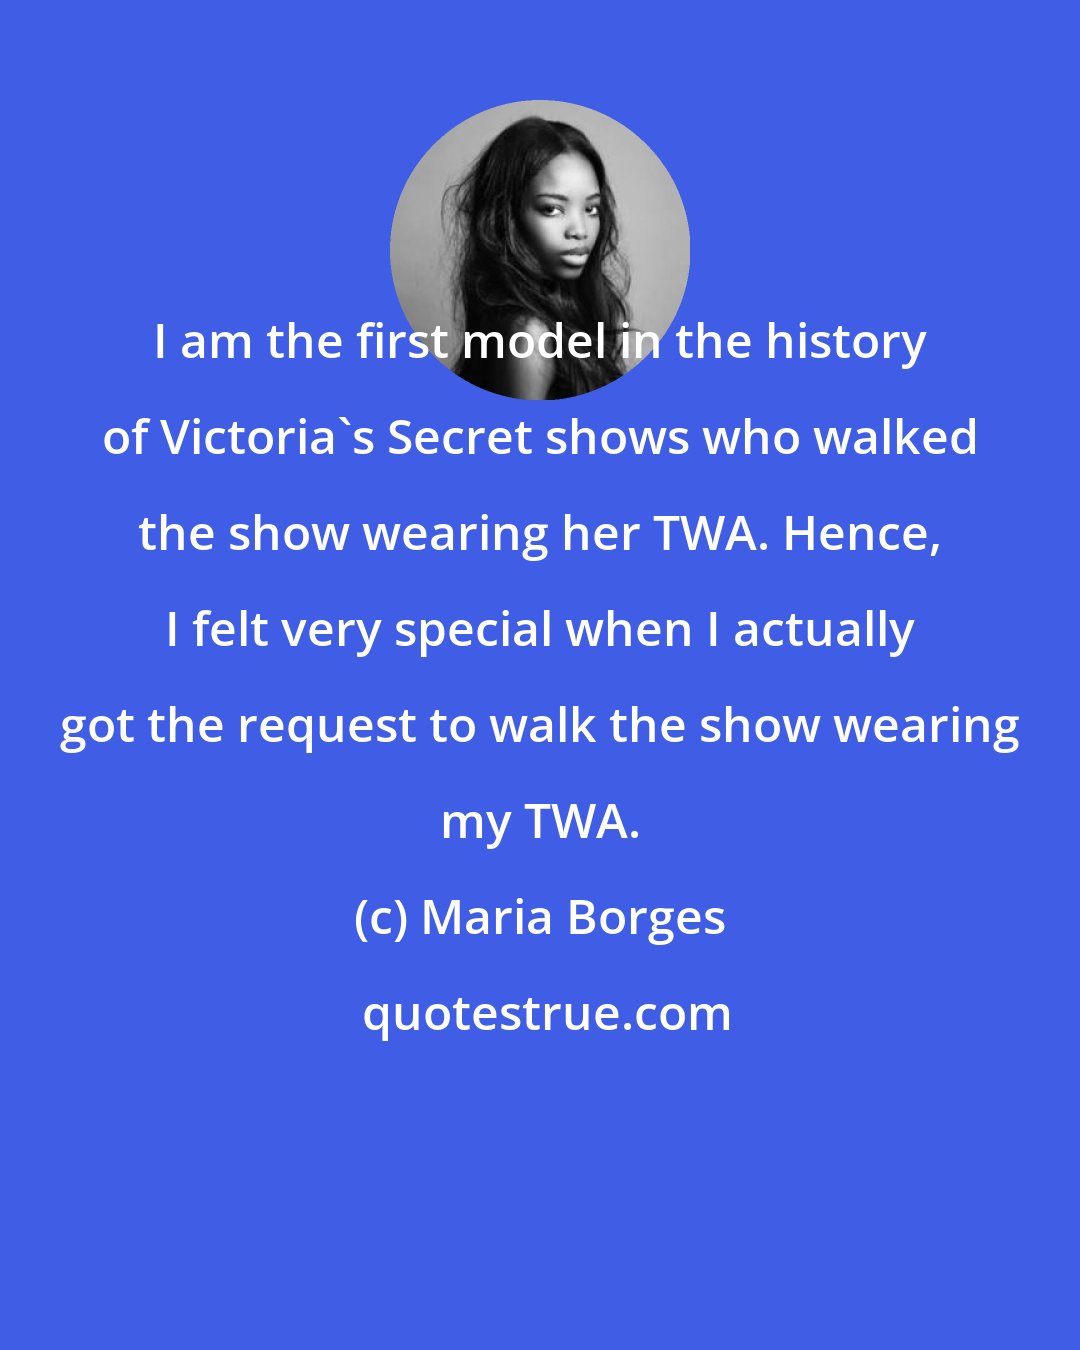 Maria Borges: I am the first model in the history of Victoria's Secret shows who walked the show wearing her TWA. Hence, I felt very special when I actually got the request to walk the show wearing my TWA.